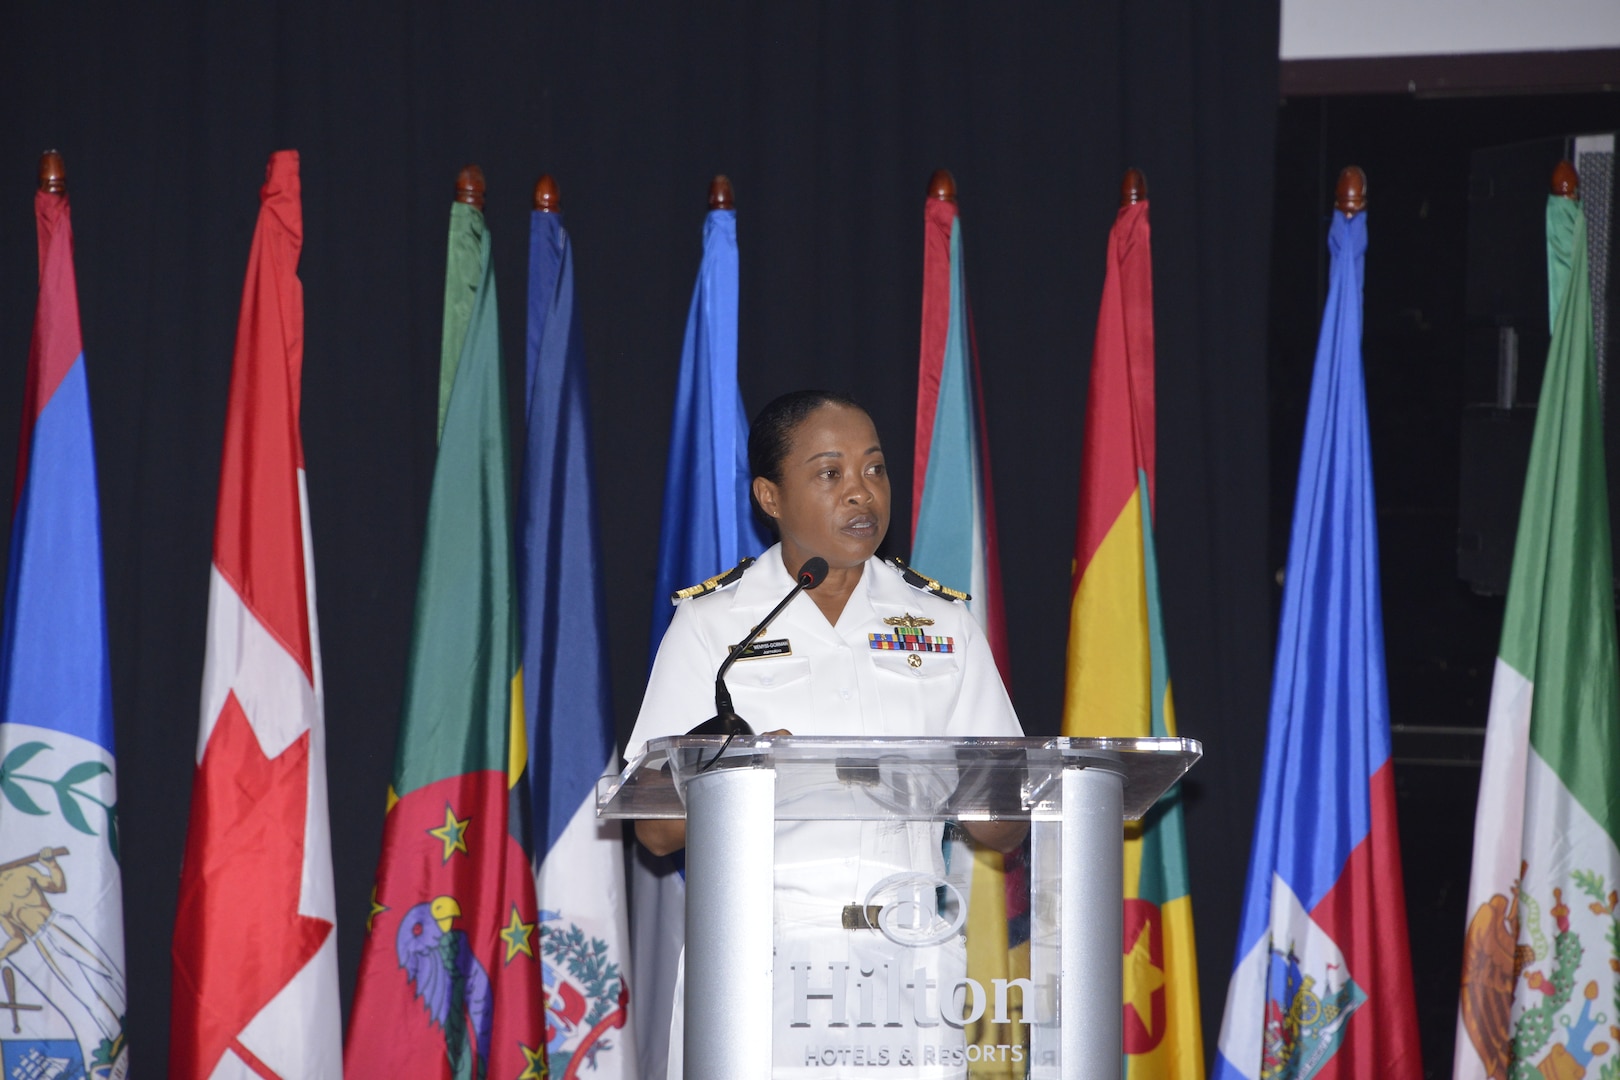 Chief of Defence Staff of Jamaican Defense Force, Rear Adm. Antonette Wemyss-Gorman, speaks during the opening ceremony for the Caribbean Nations Security Conference (CANSEC 2023).